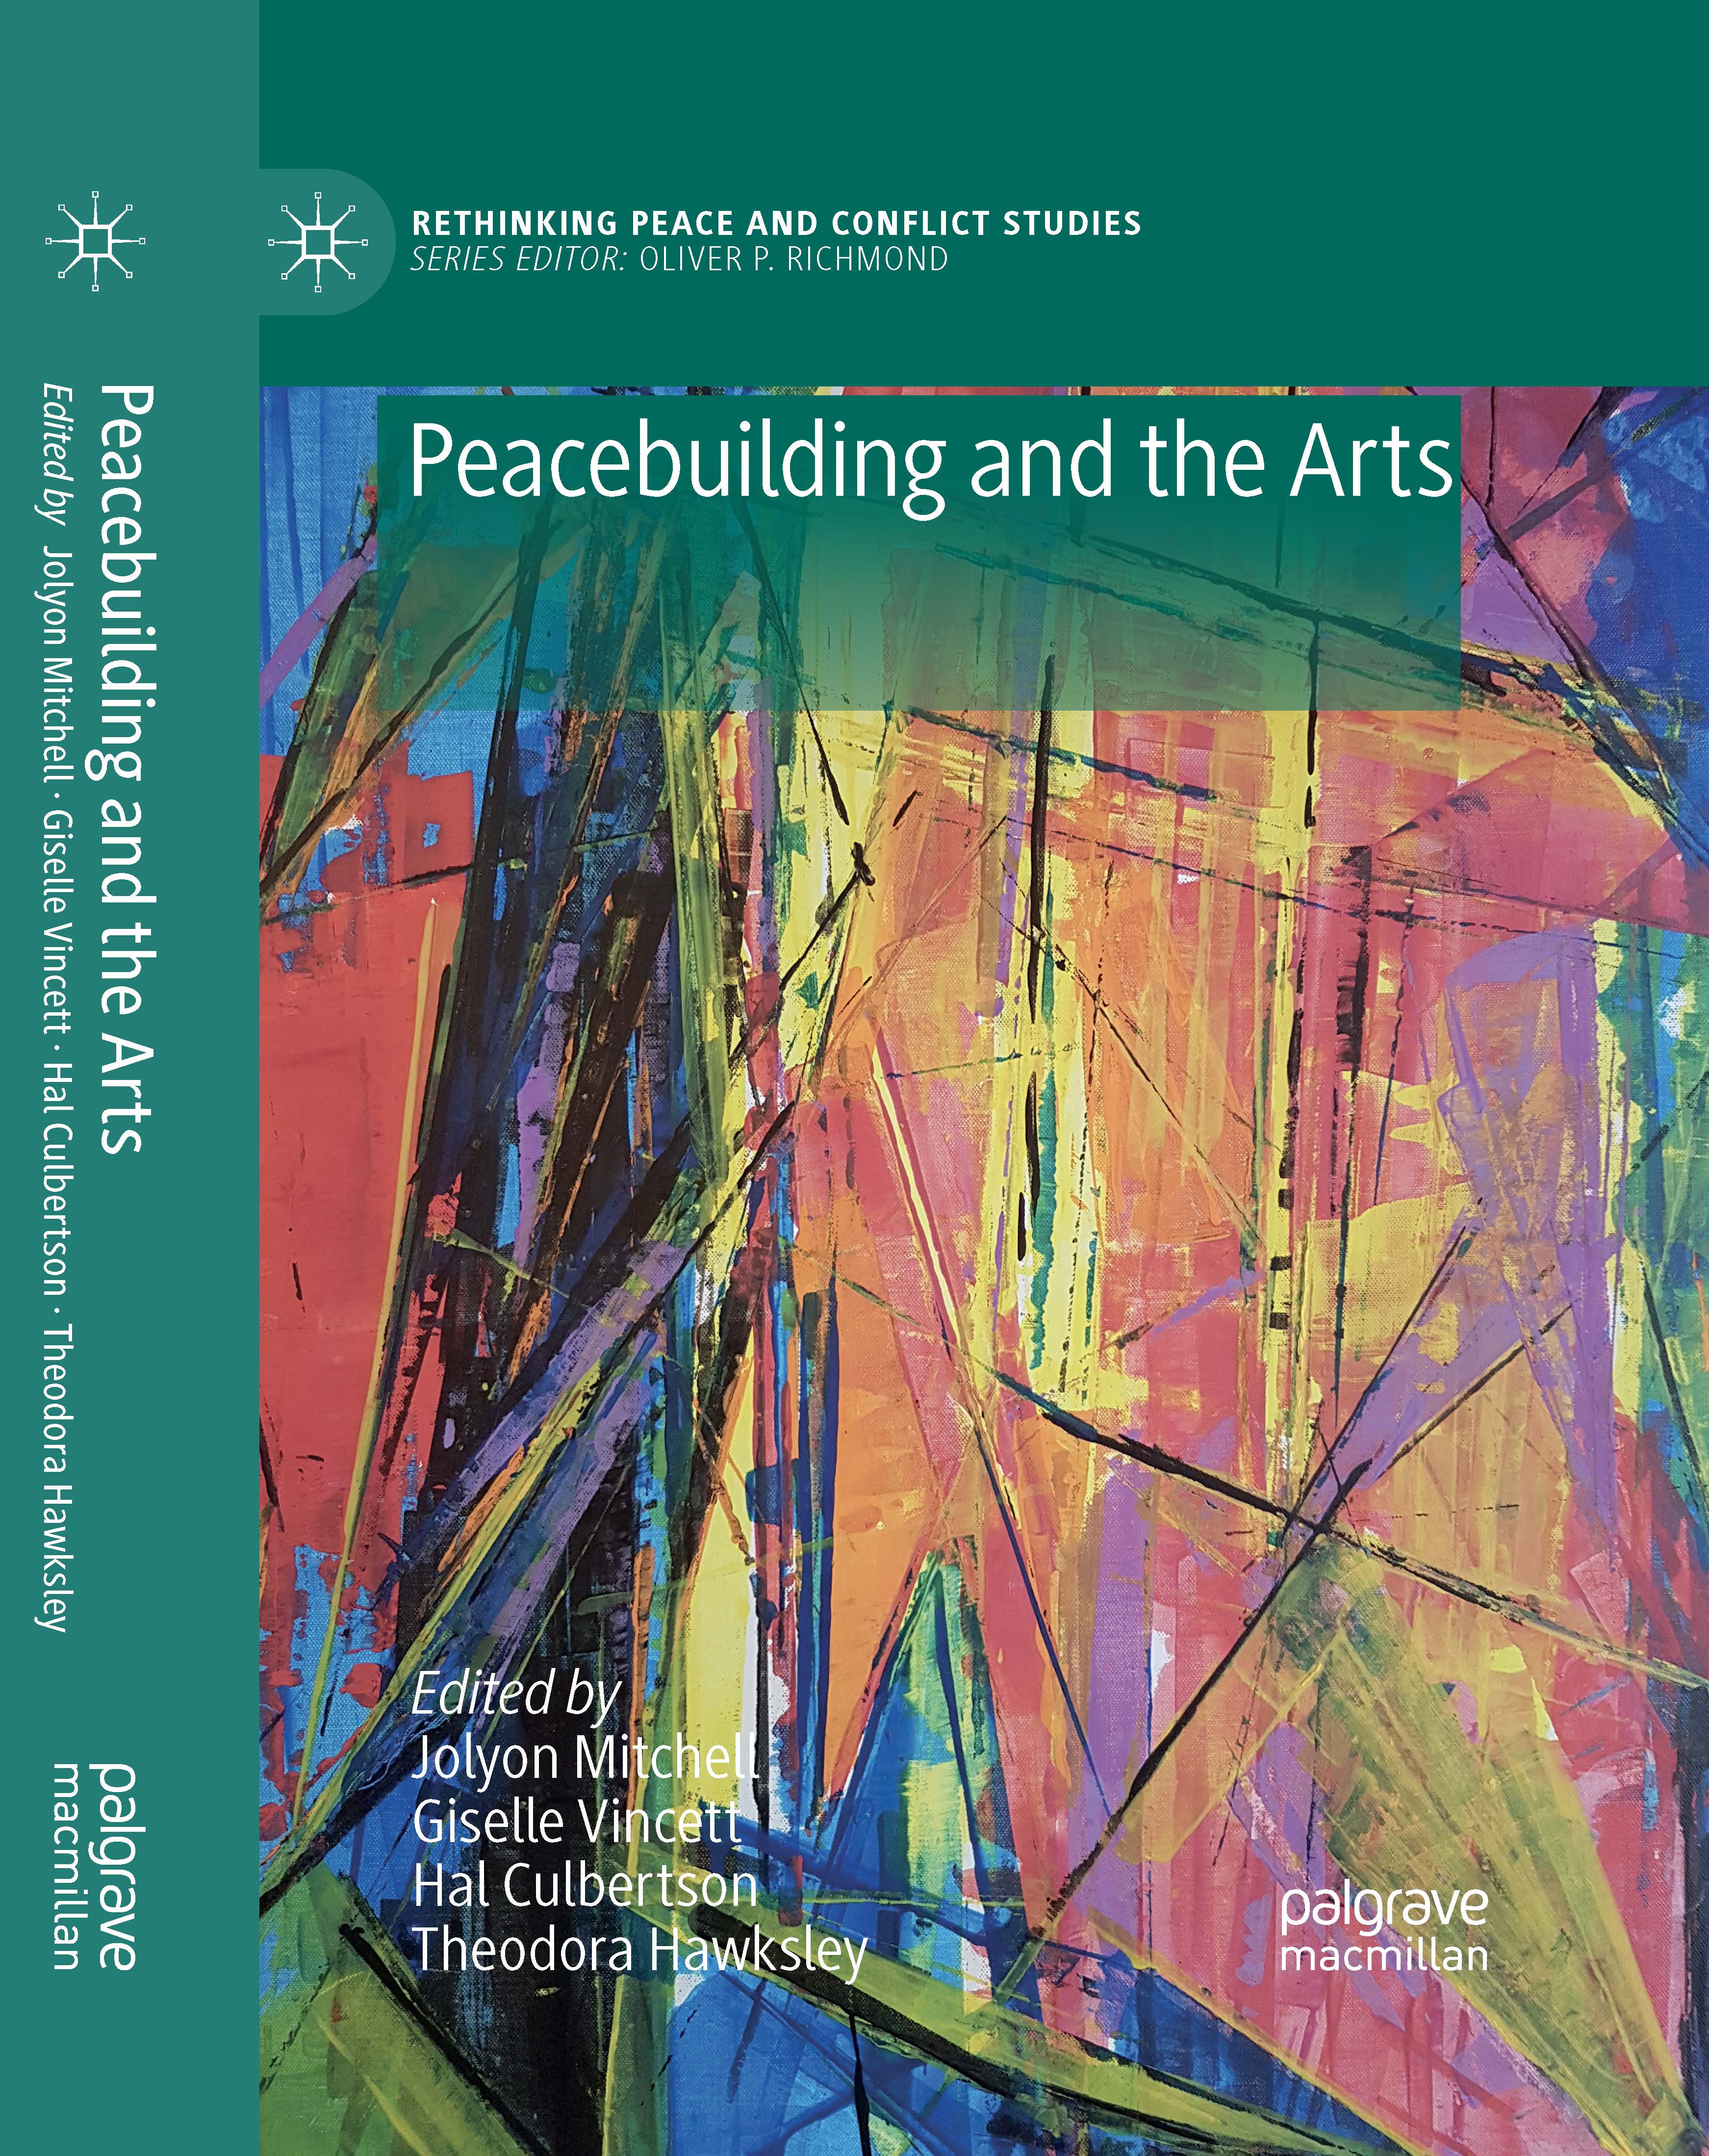 Colour book cover of Peacebuilding and the Arts